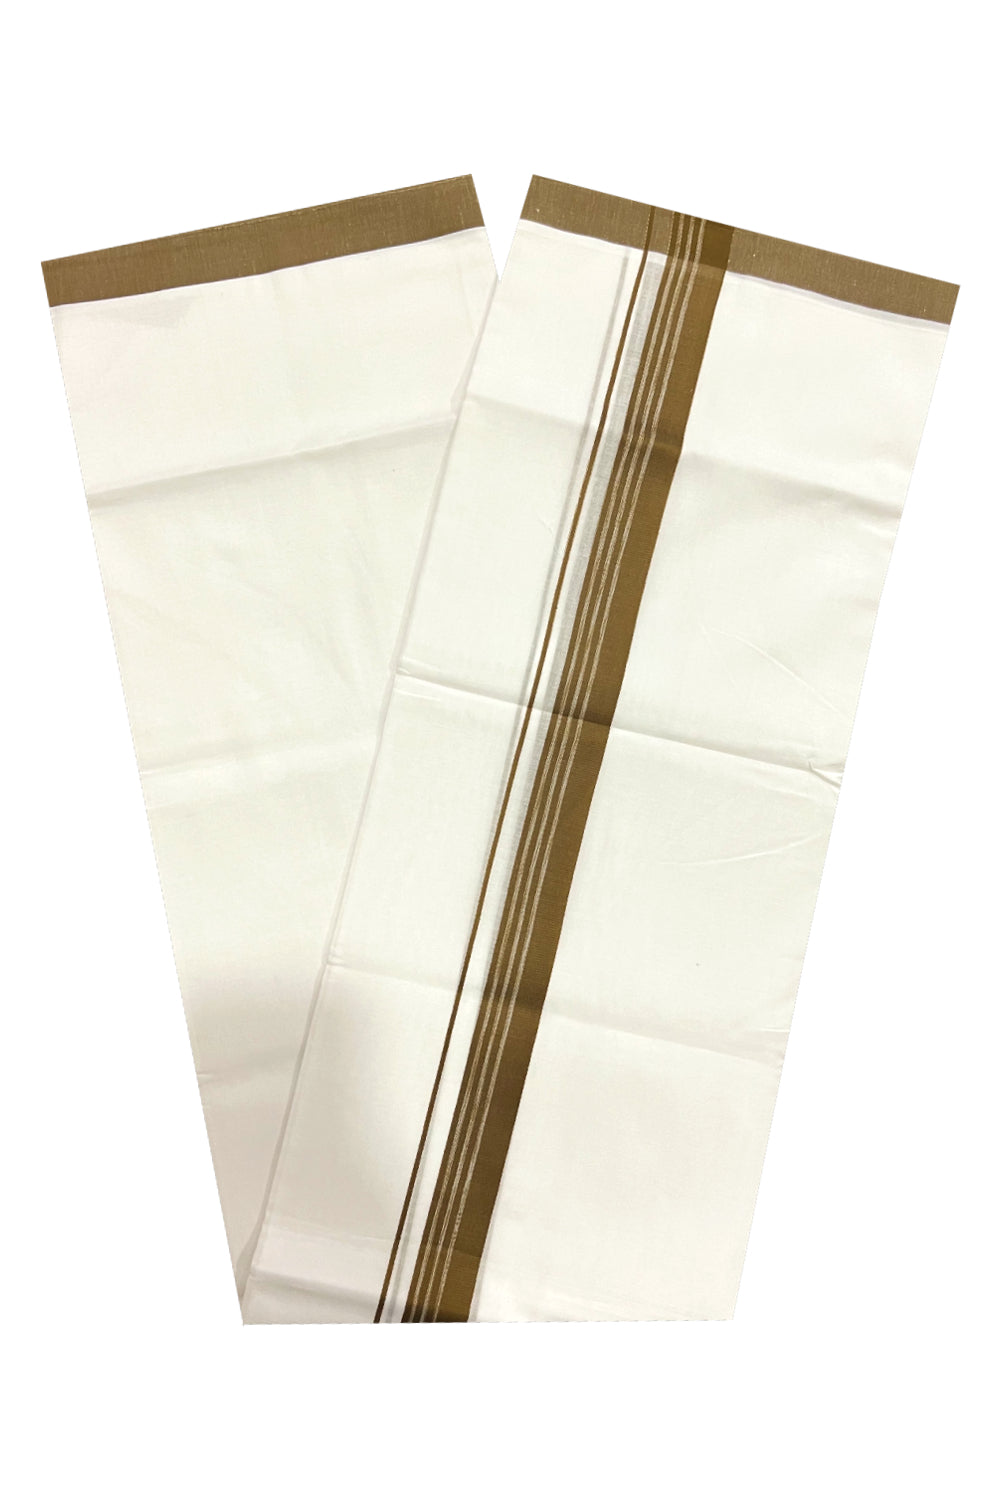 Pure White Cotton Double Mundu with Brown Border (South Indian Dhoti)